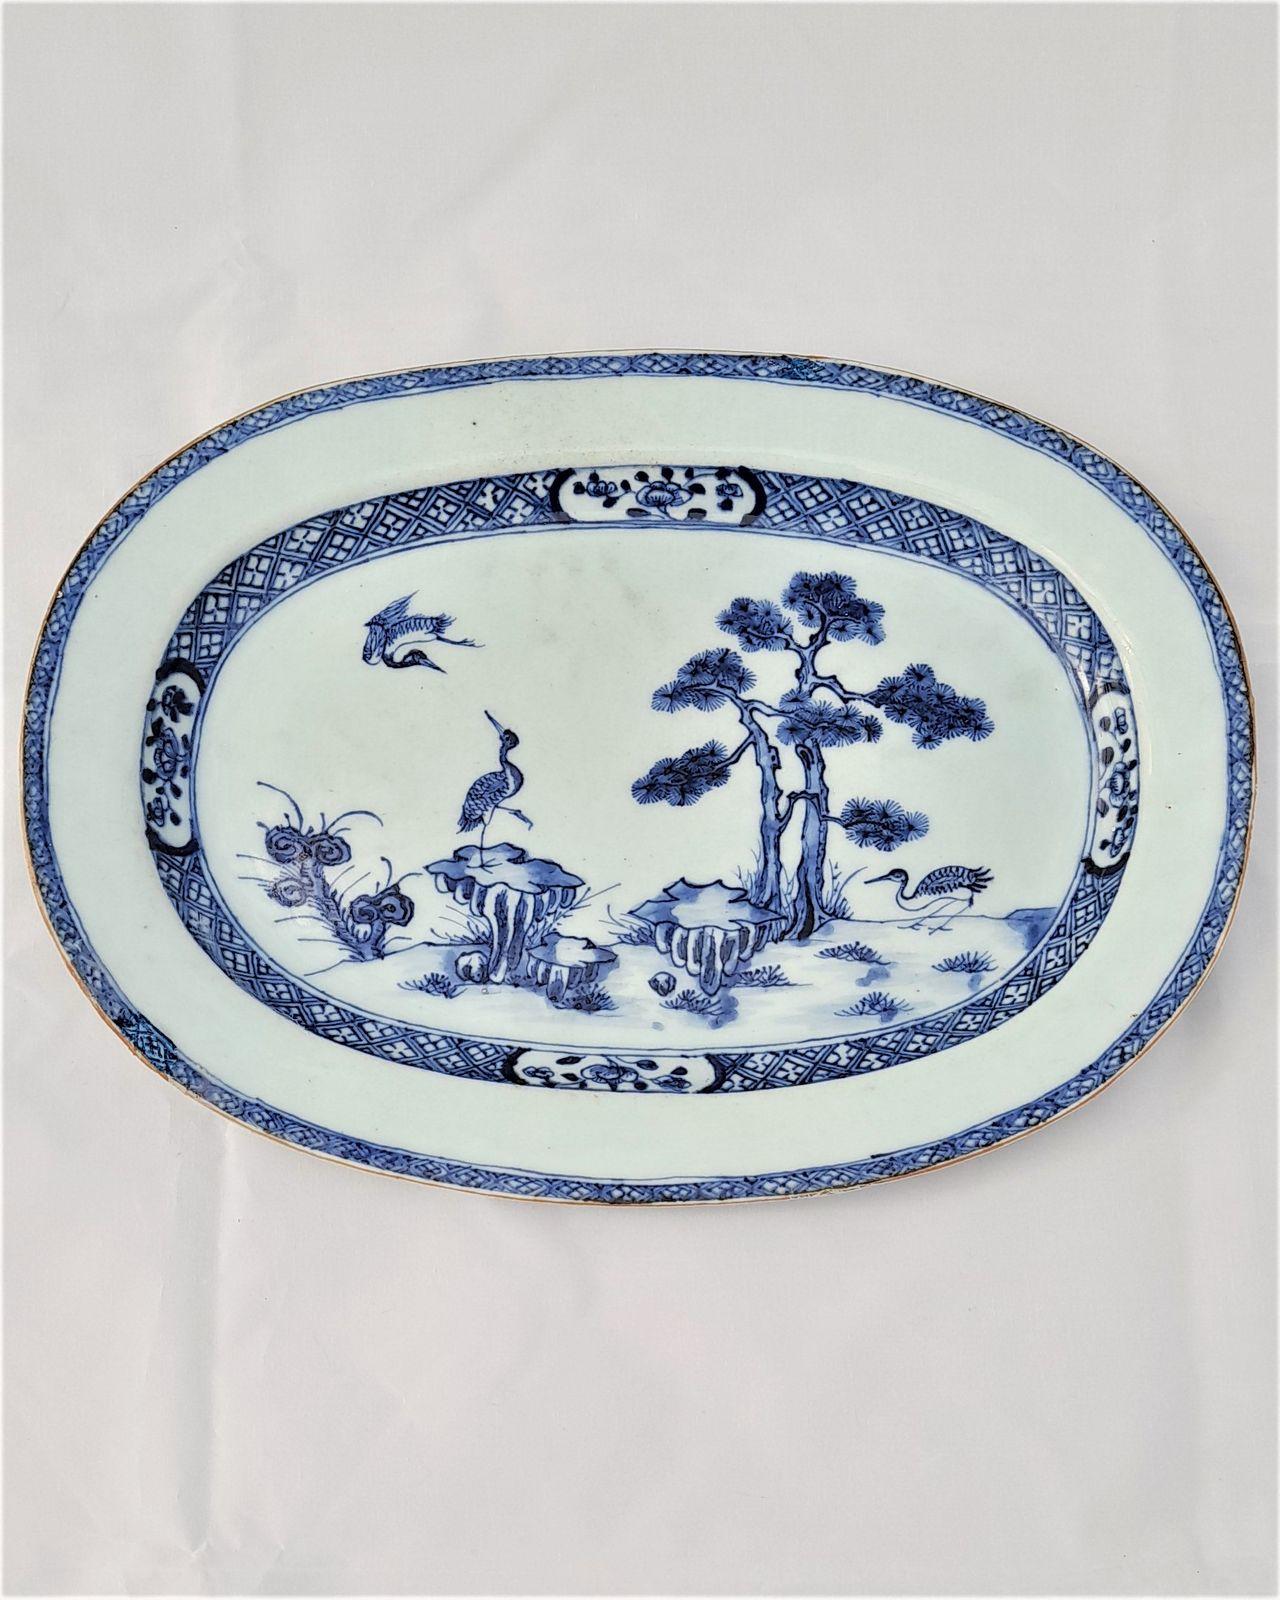 A small oval shaped 12 inch long antique Chinese export porcelain platter, meat plate, serving dish or small charger with hand painted decoration in under-glaze cobalt blue and white with a brown Batavian rim. The beautifully and confidently hand painted design in the centre of the plate has three cranes, one in flight, one amongst rocks, two pine trees and Lingzhi fungus.